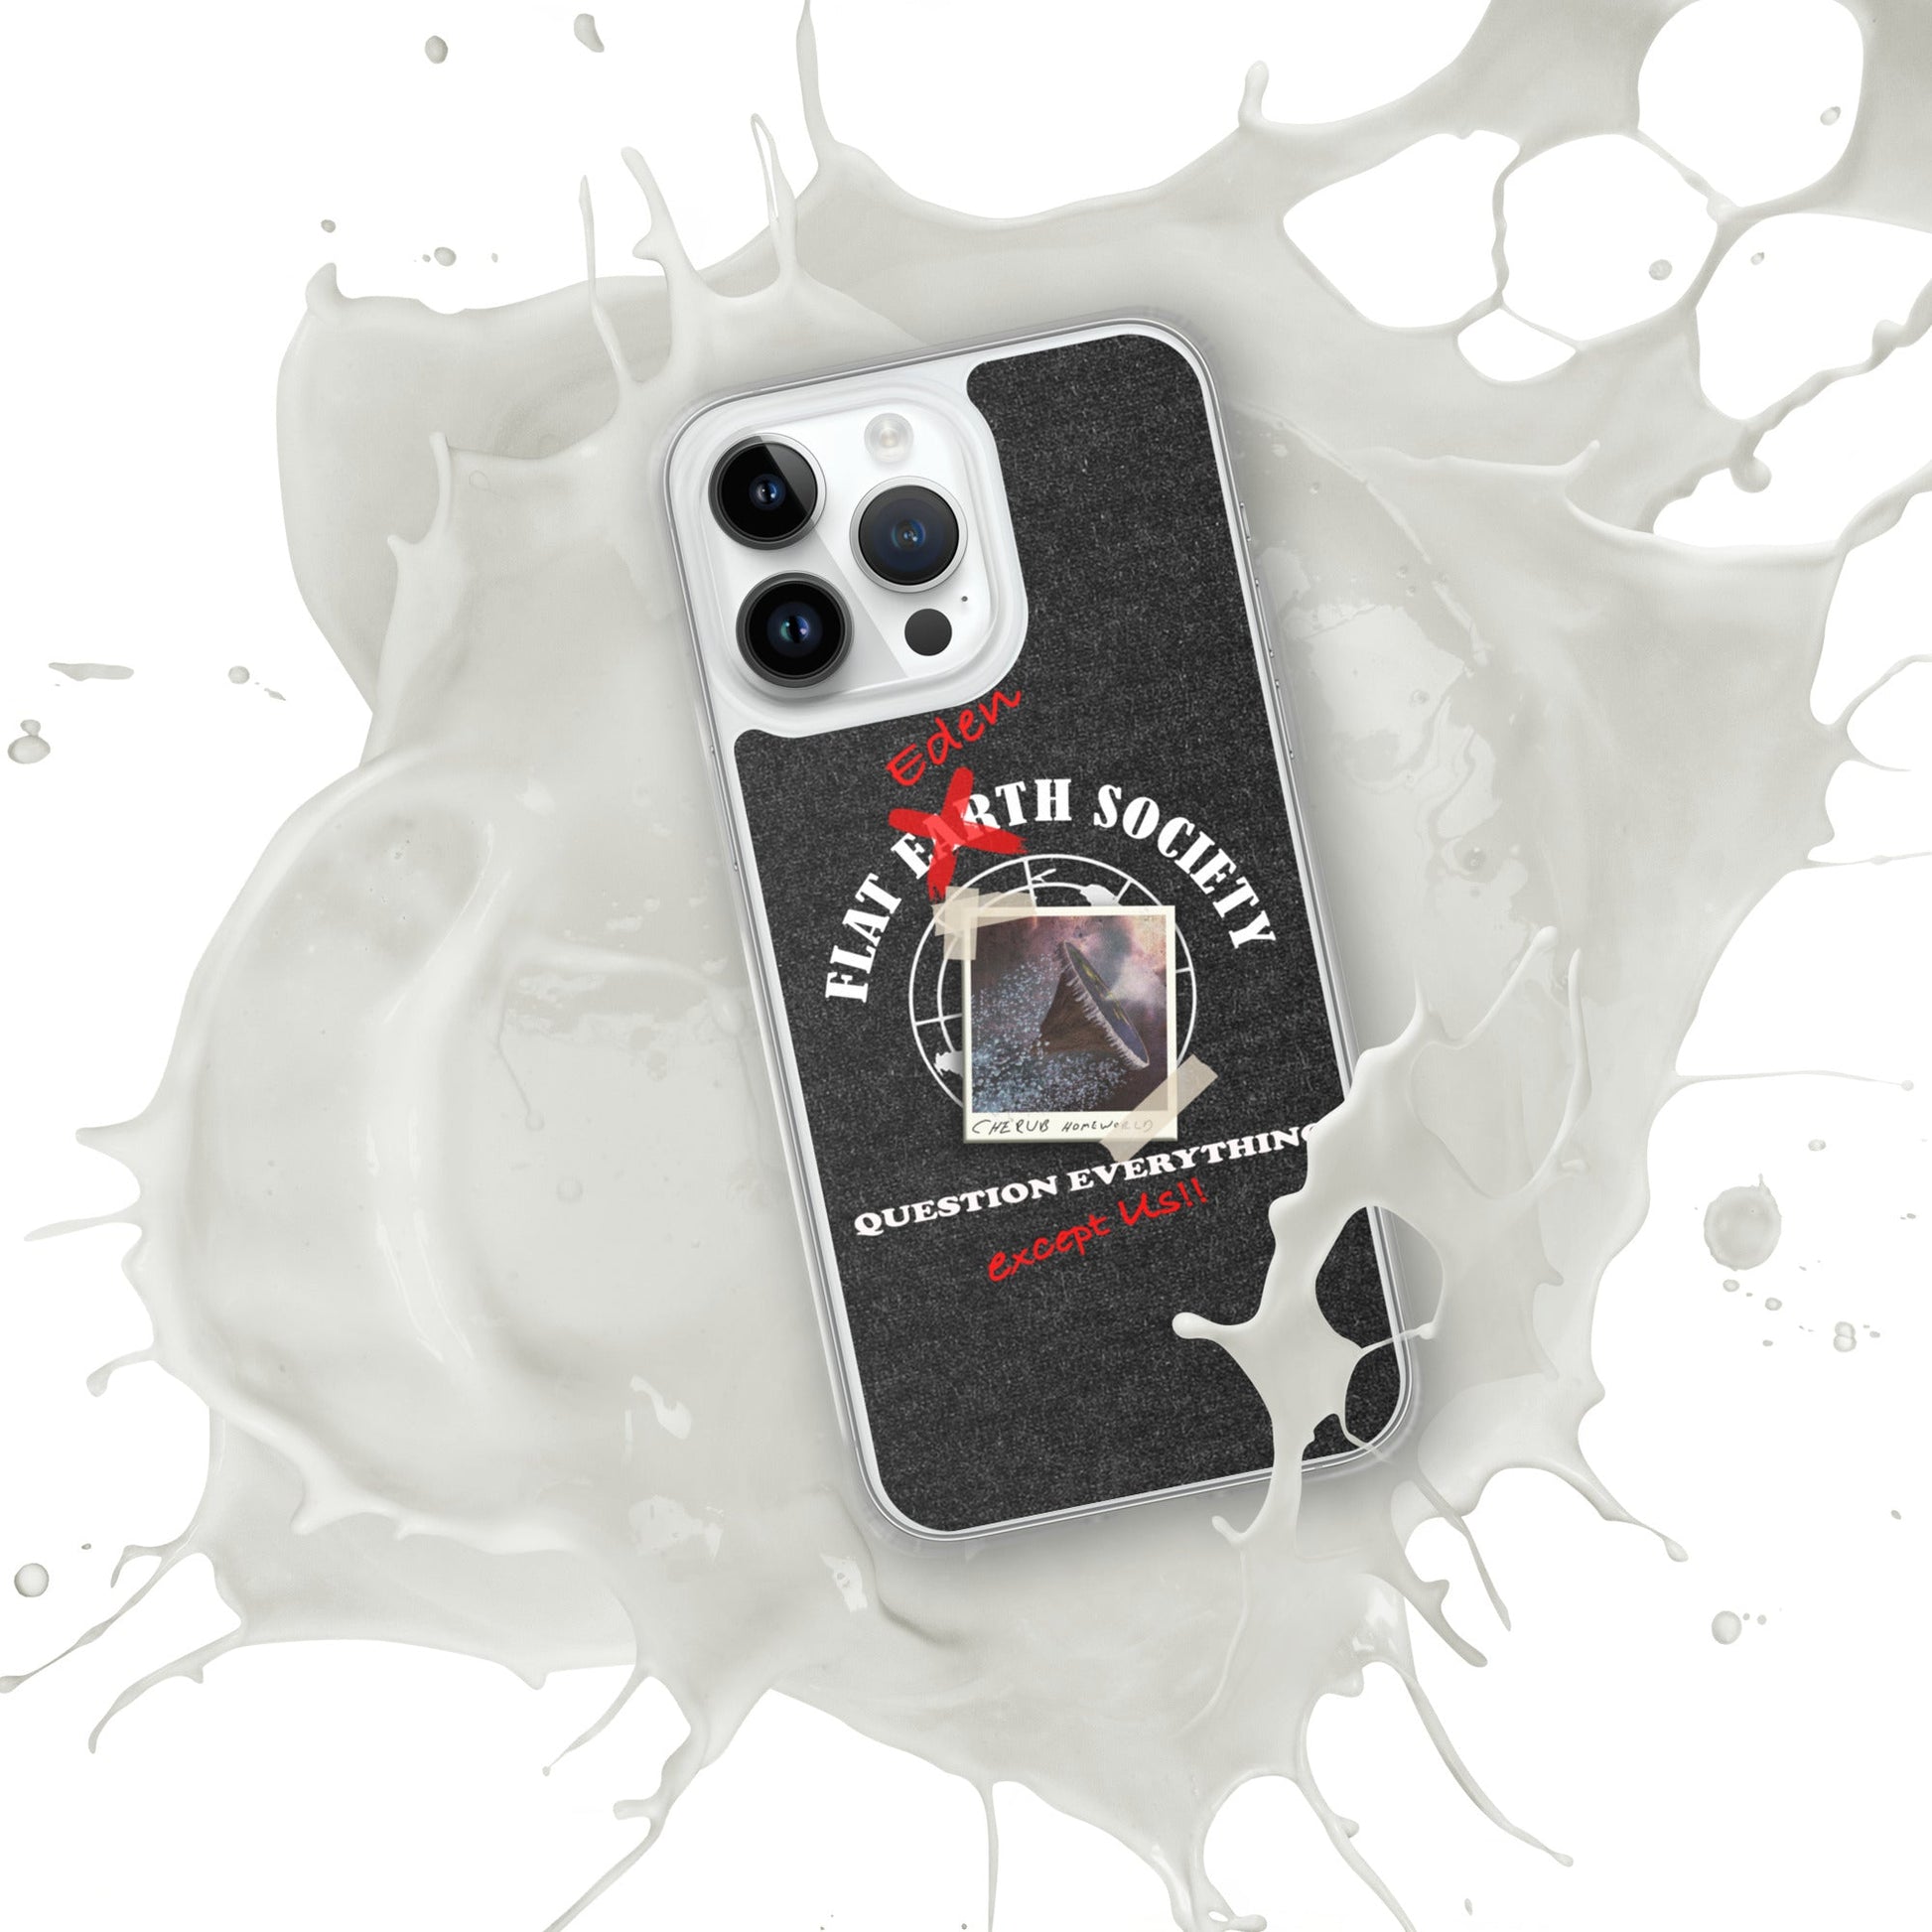 iPhone Case | Intergalactic Space Force 2 | Flat Eden Society - Spectral Ink Shop - Mobile Phone Cases -9780728_16243